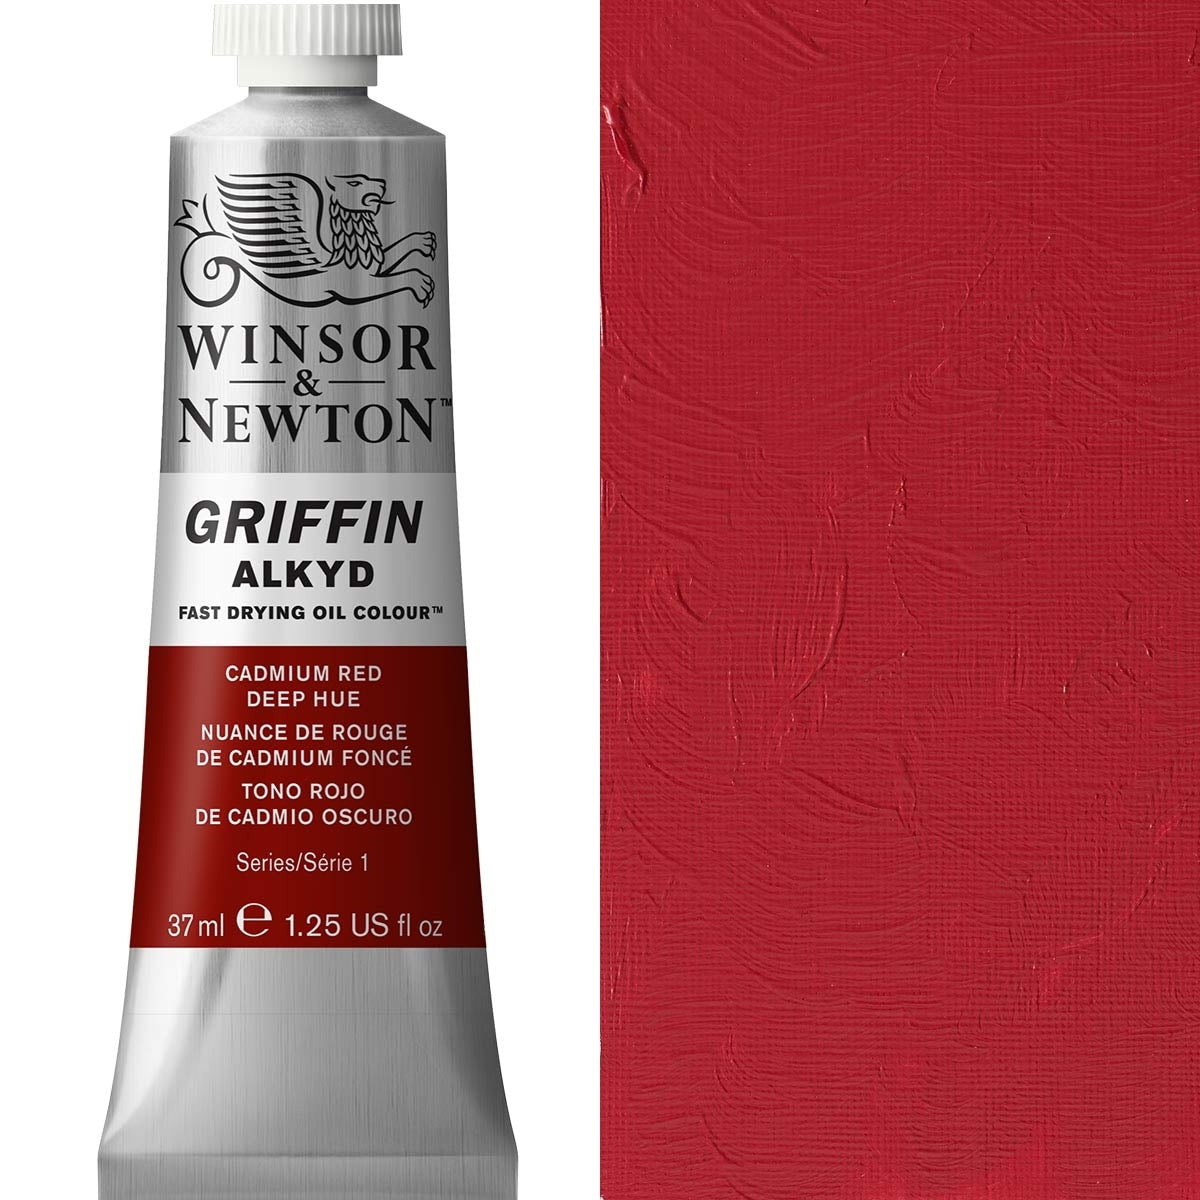 Winsor and Newton - Griffin ALKYD Oil Colour - 37ml - Cadmium Red Deep Hue